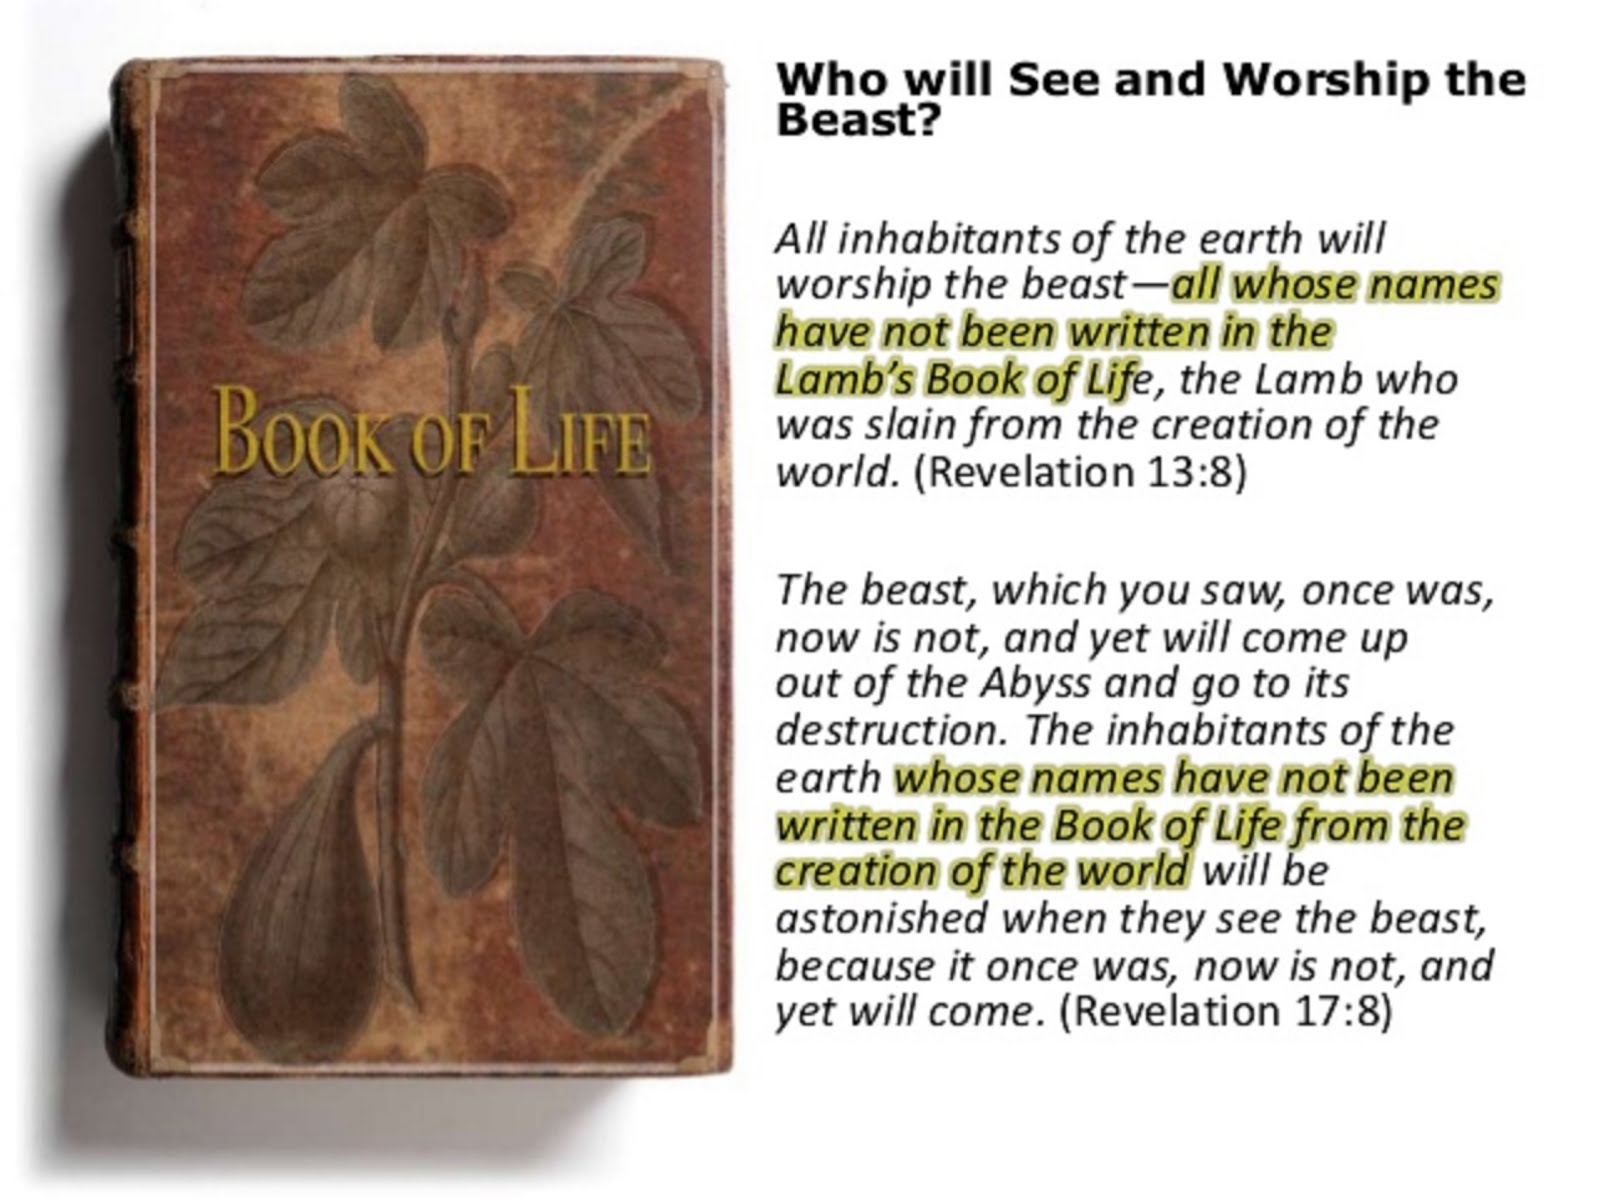 THE BOOK OF LIFE WAS WRITTEN BEFORE THE FOUNDATION OF THE WORLD